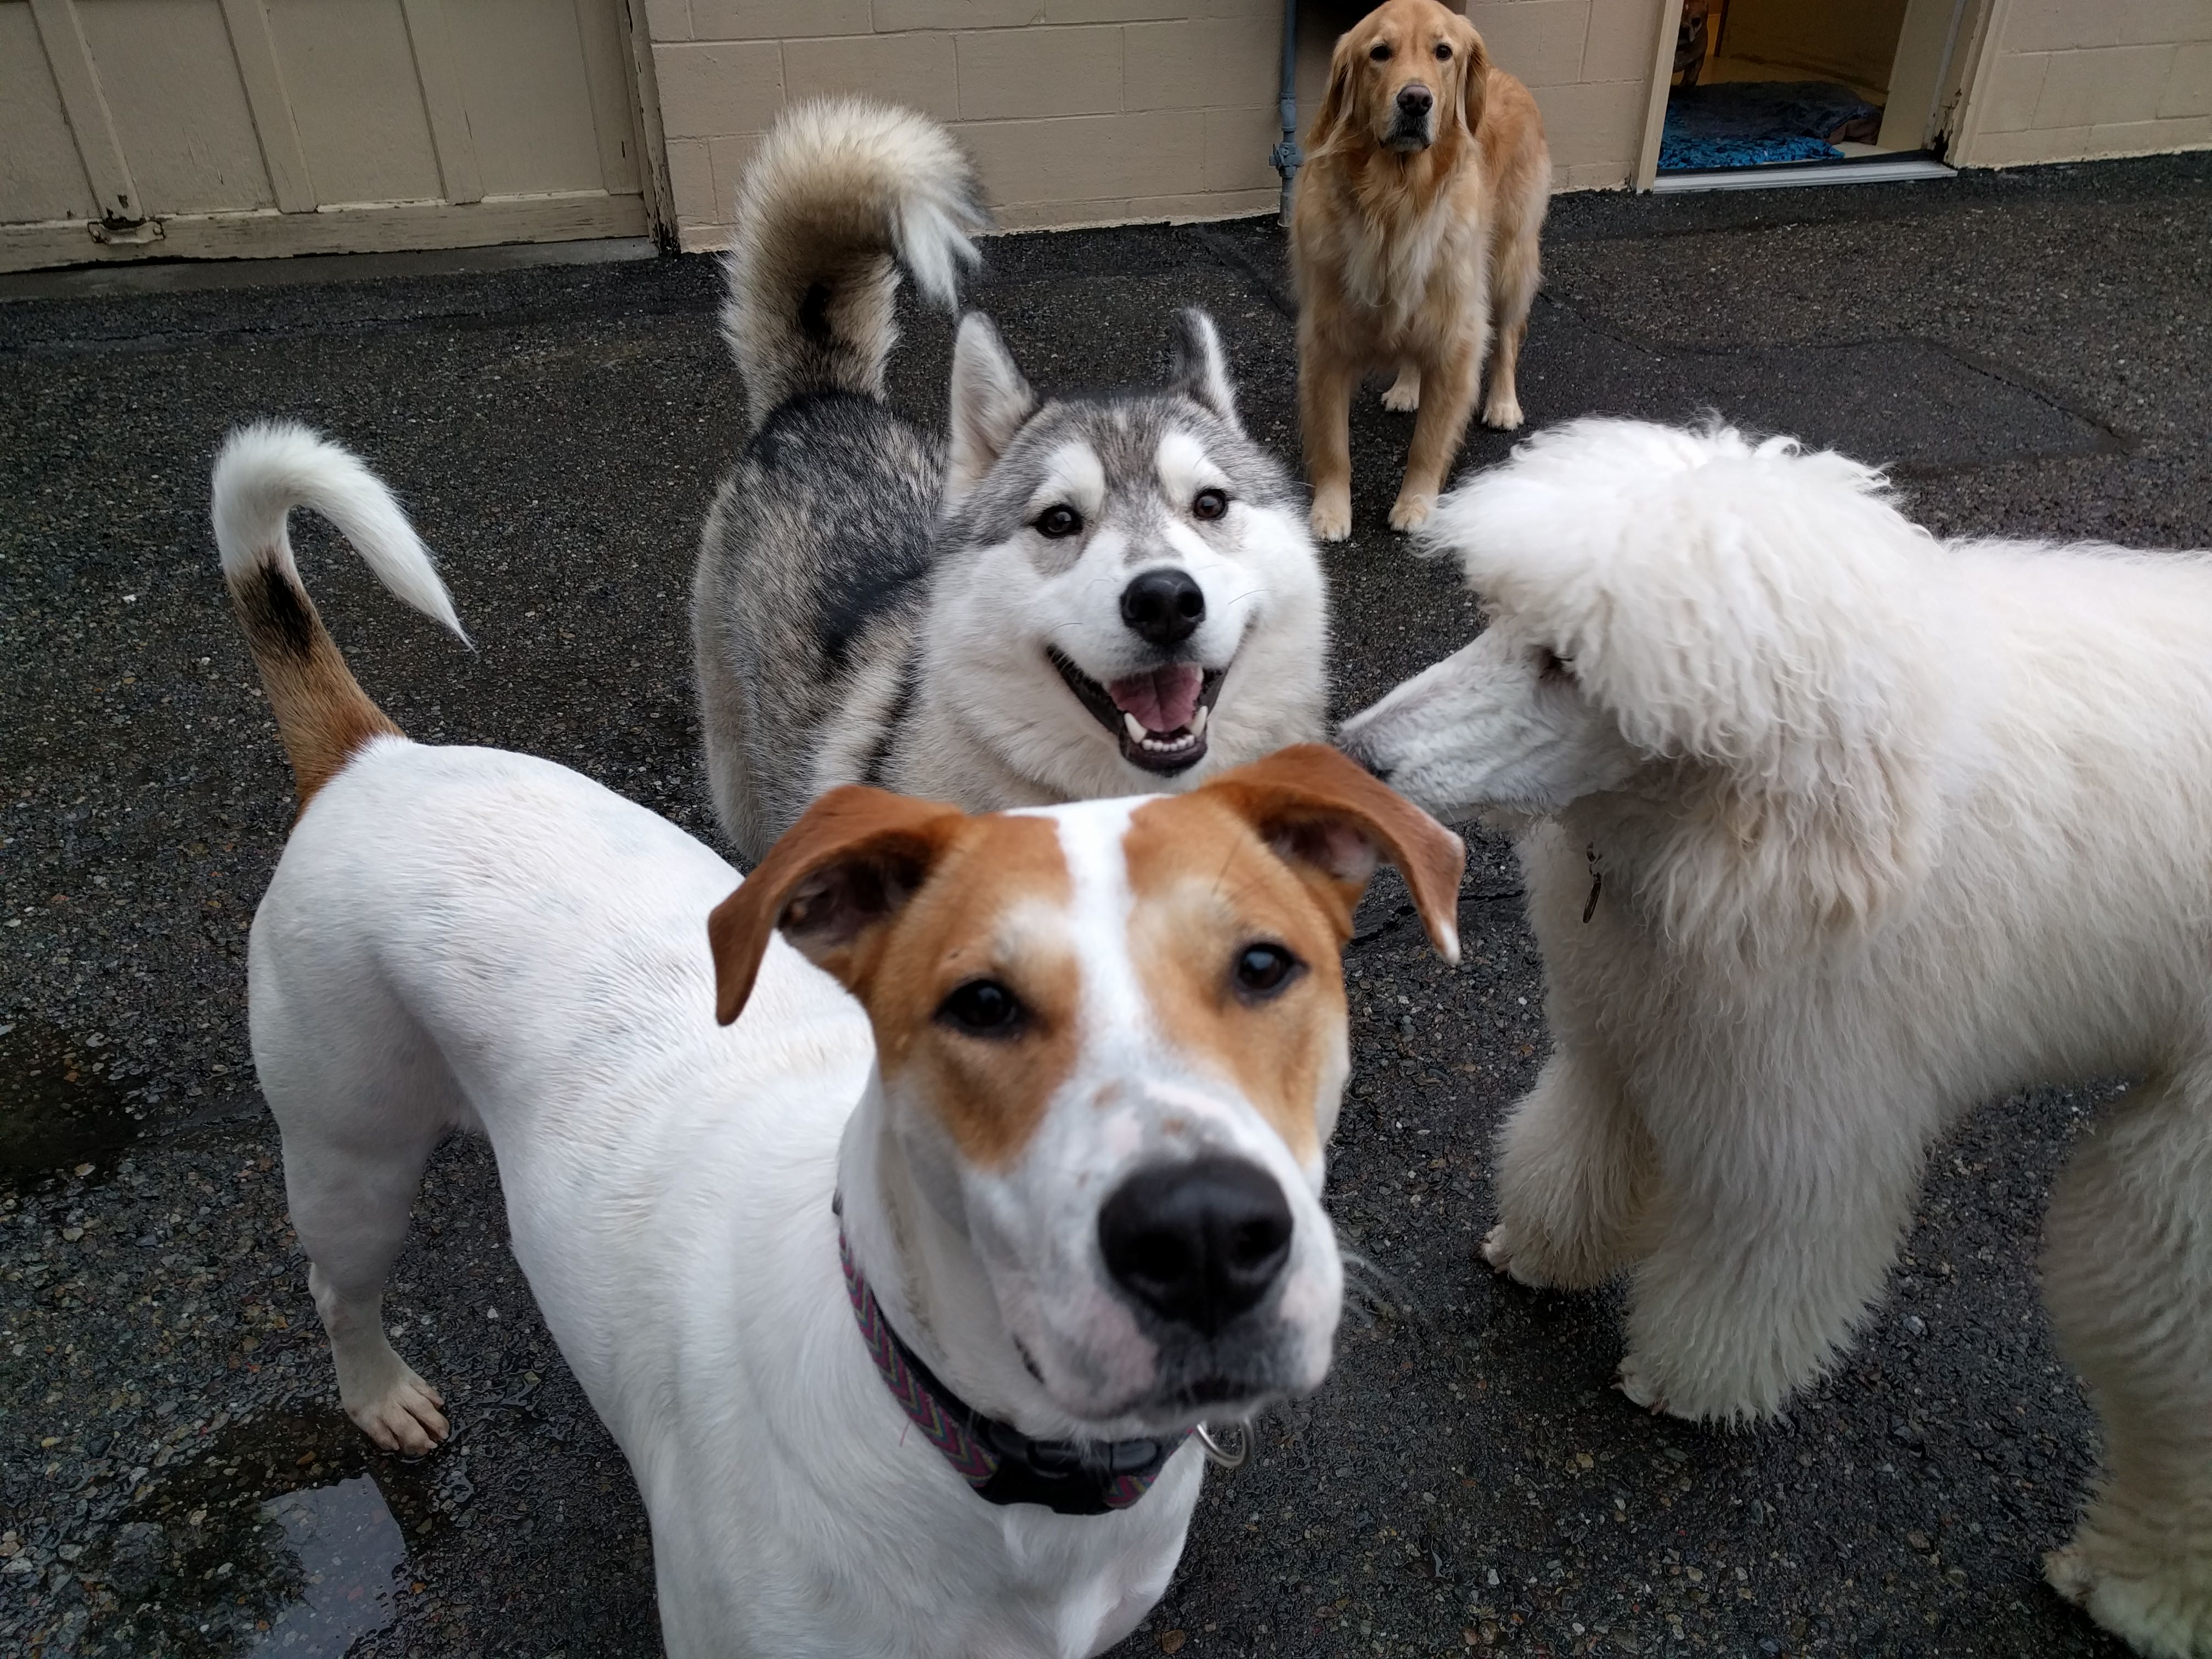 I work at a Doggy Daycare. More work pictures! - Album on Imgur